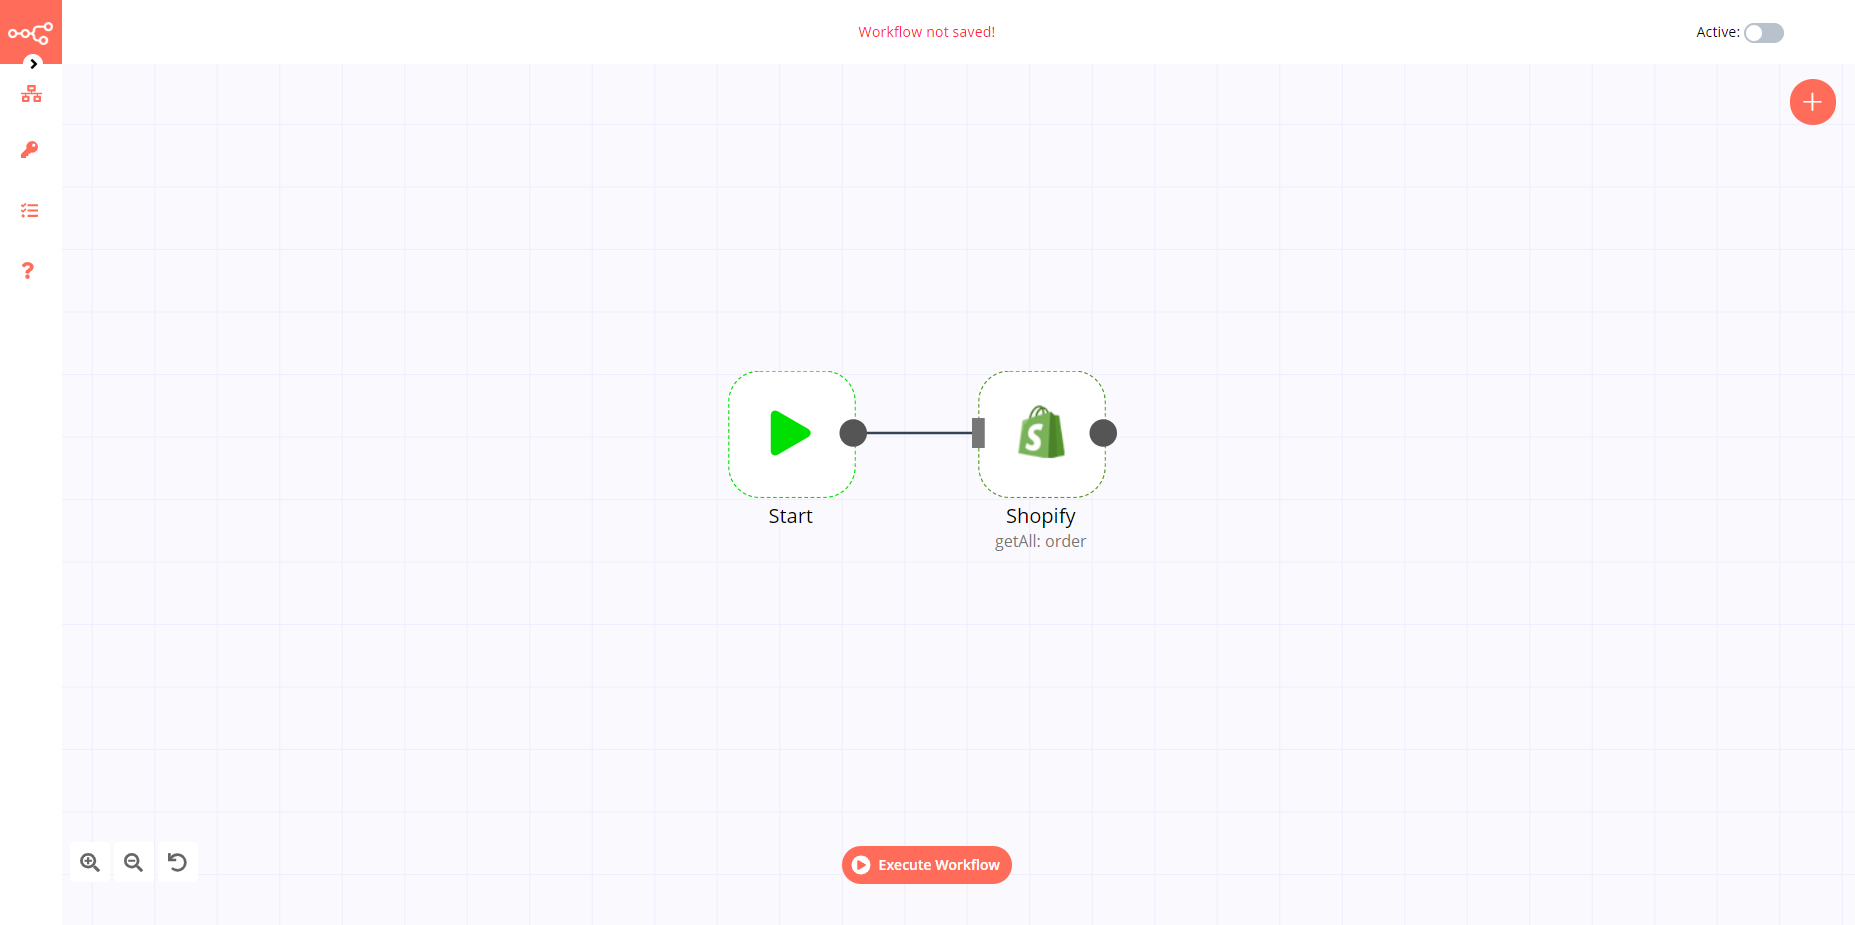 A workflow with the Shopify node